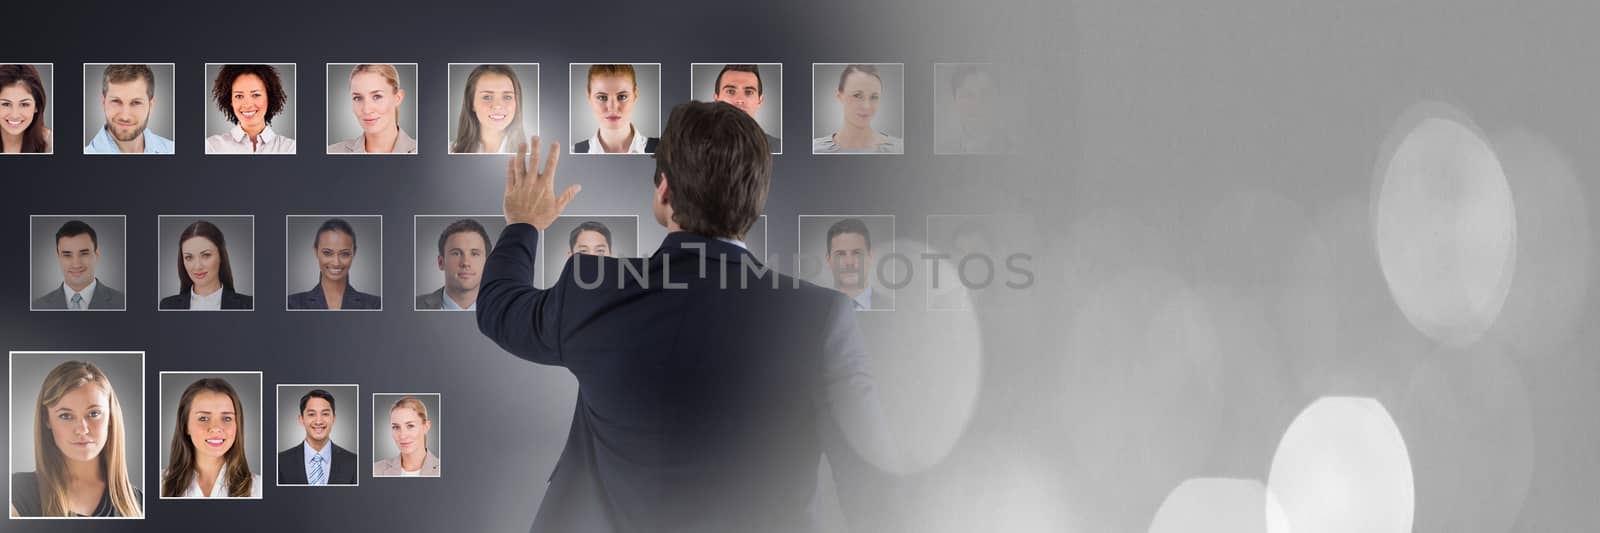 Man touching portrait profiles of different people by Wavebreakmedia